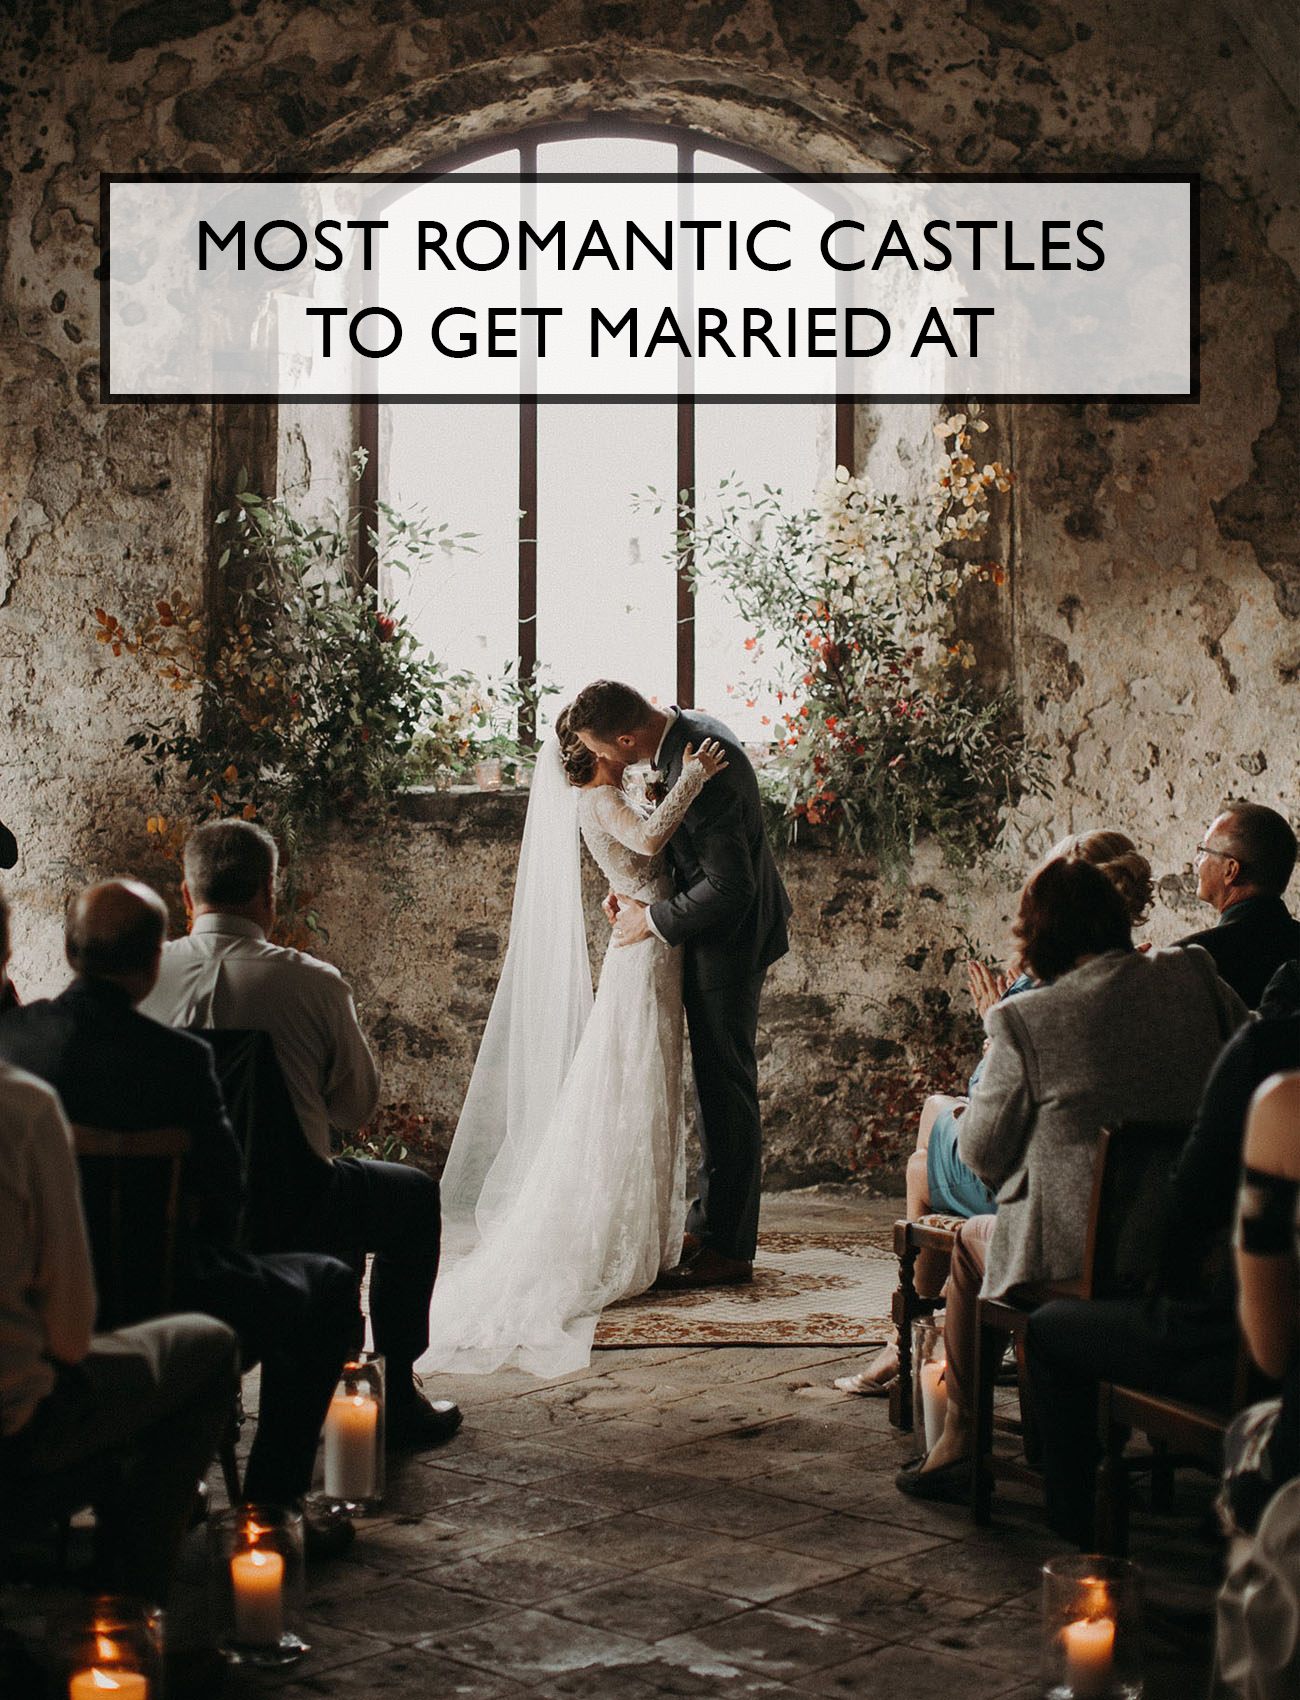 Live Out All Your Fairy Tale Dreams…These Are the Most Romantic Castles to Get Married At!